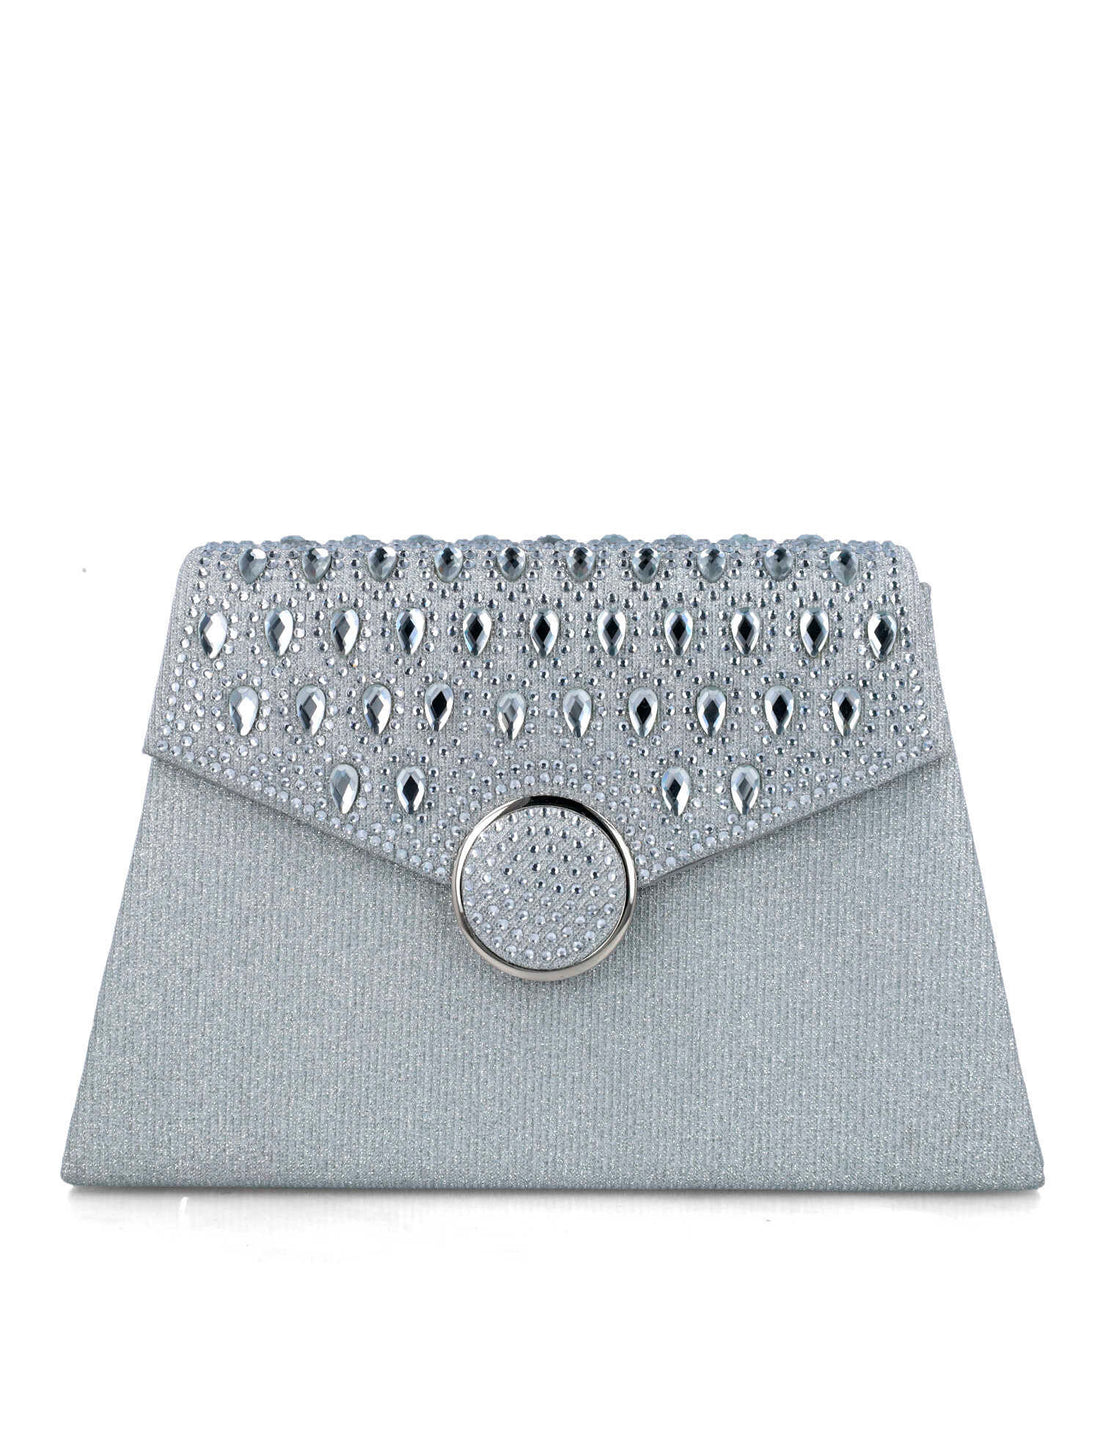 Silver Clutch With Embellished Flap_85636_09_01